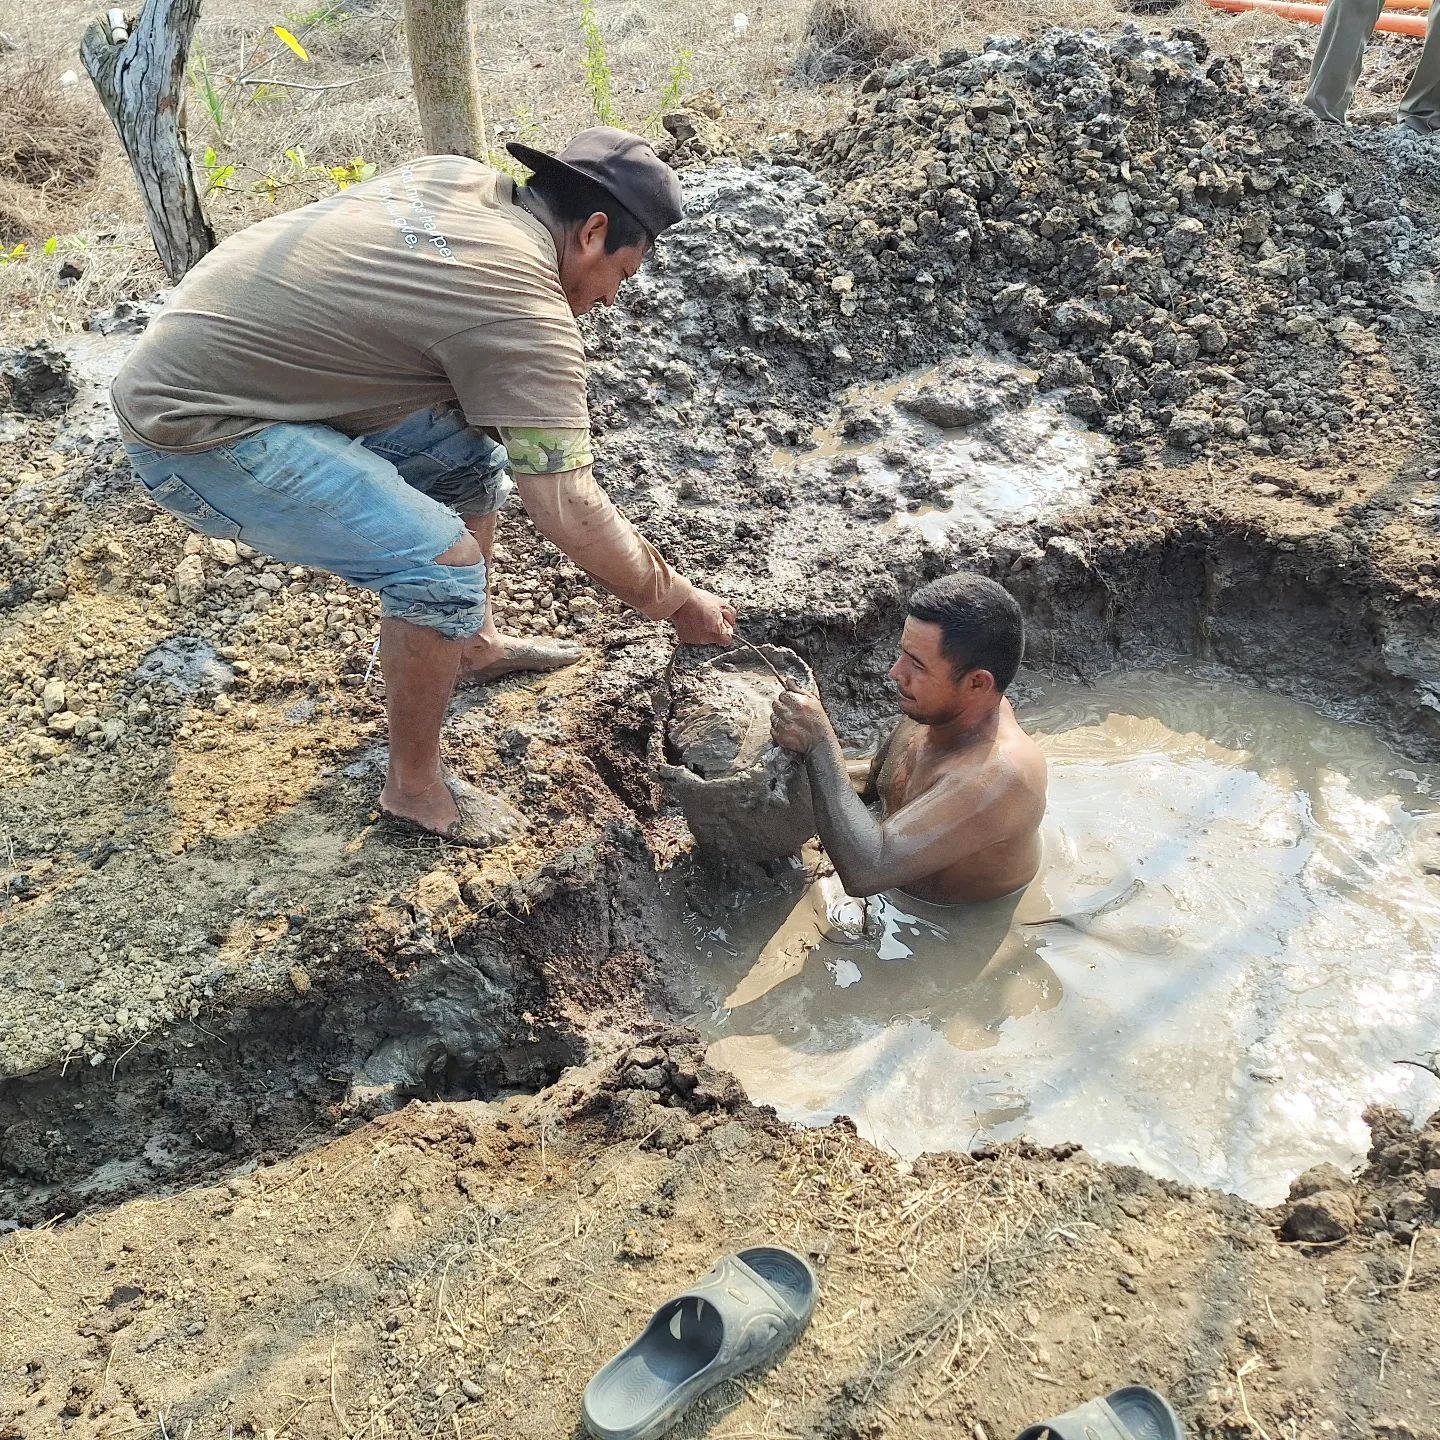 At a recent well drilling trip. One of the local men cleaning the mud pits and getting a skin mud treatment at the same time :-)